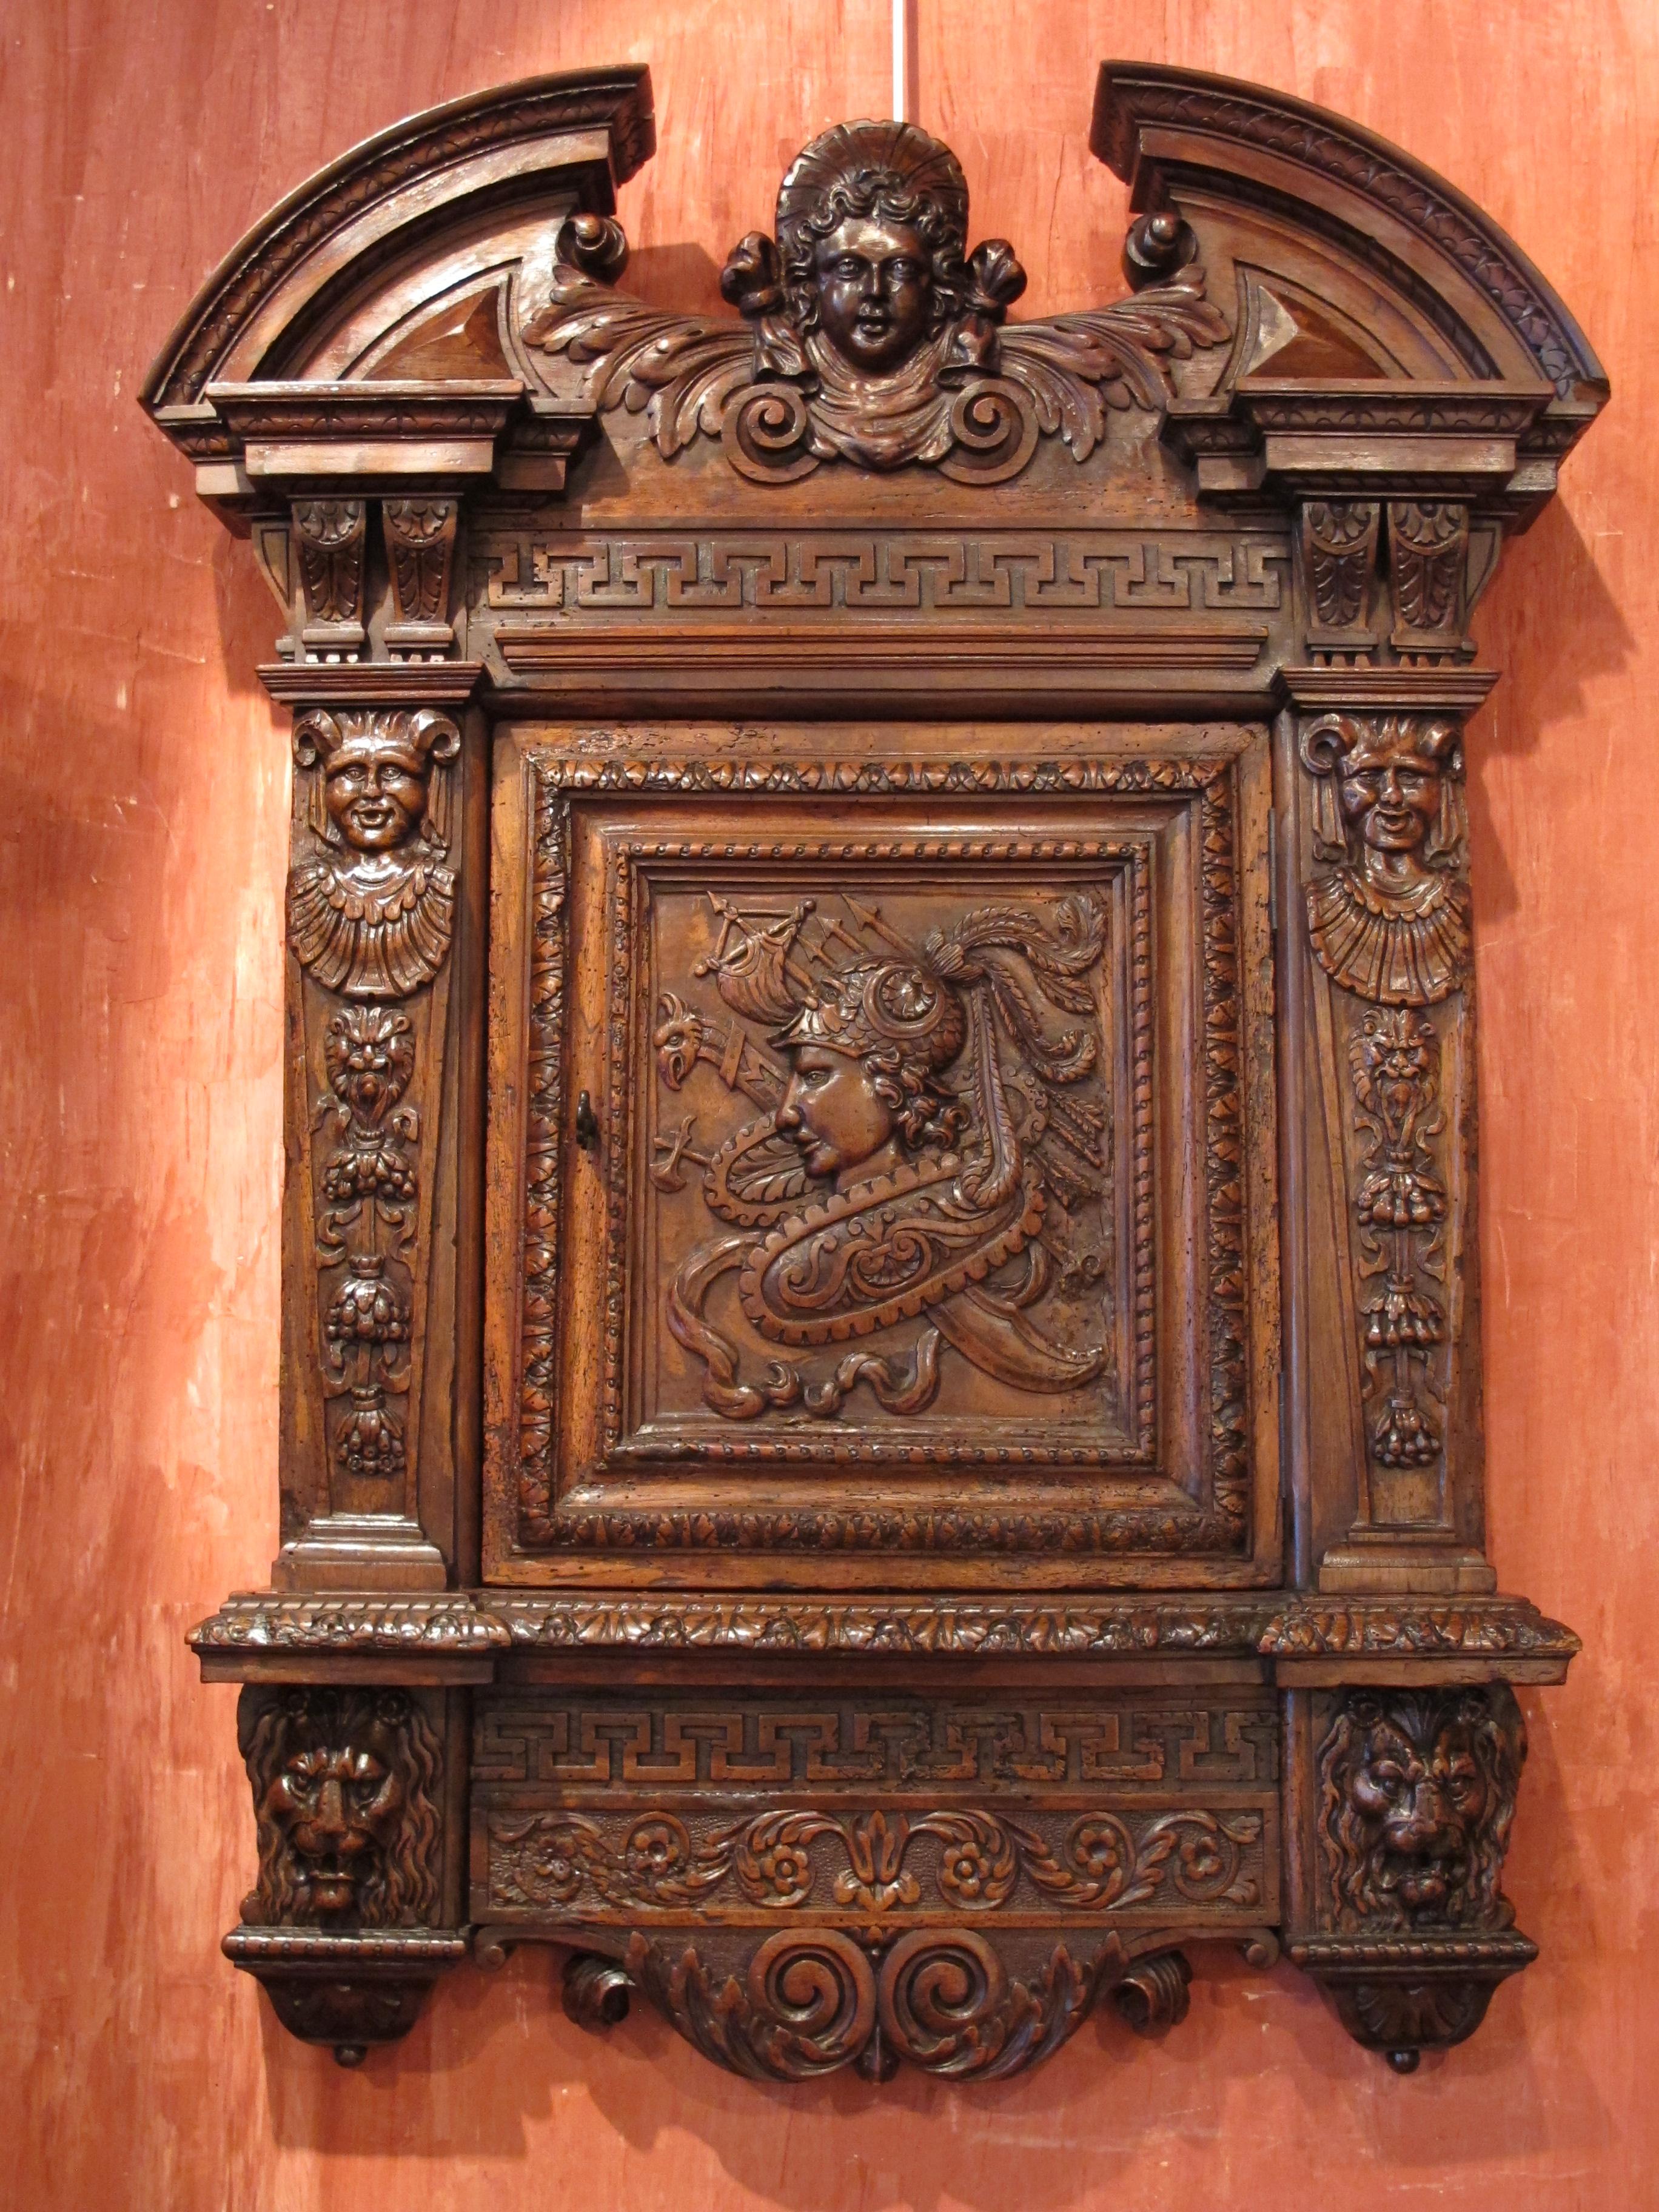 Renaissance Armoirette frontage

ORIGINE: FRANCE
EPOQUE : 16th CENTURY

Measures: height : 90 cm
length : 65 cm
depth : 10 cm

Walnut

The armoirette is used to store valuables, small precious items. 

The lower part is flanked by two